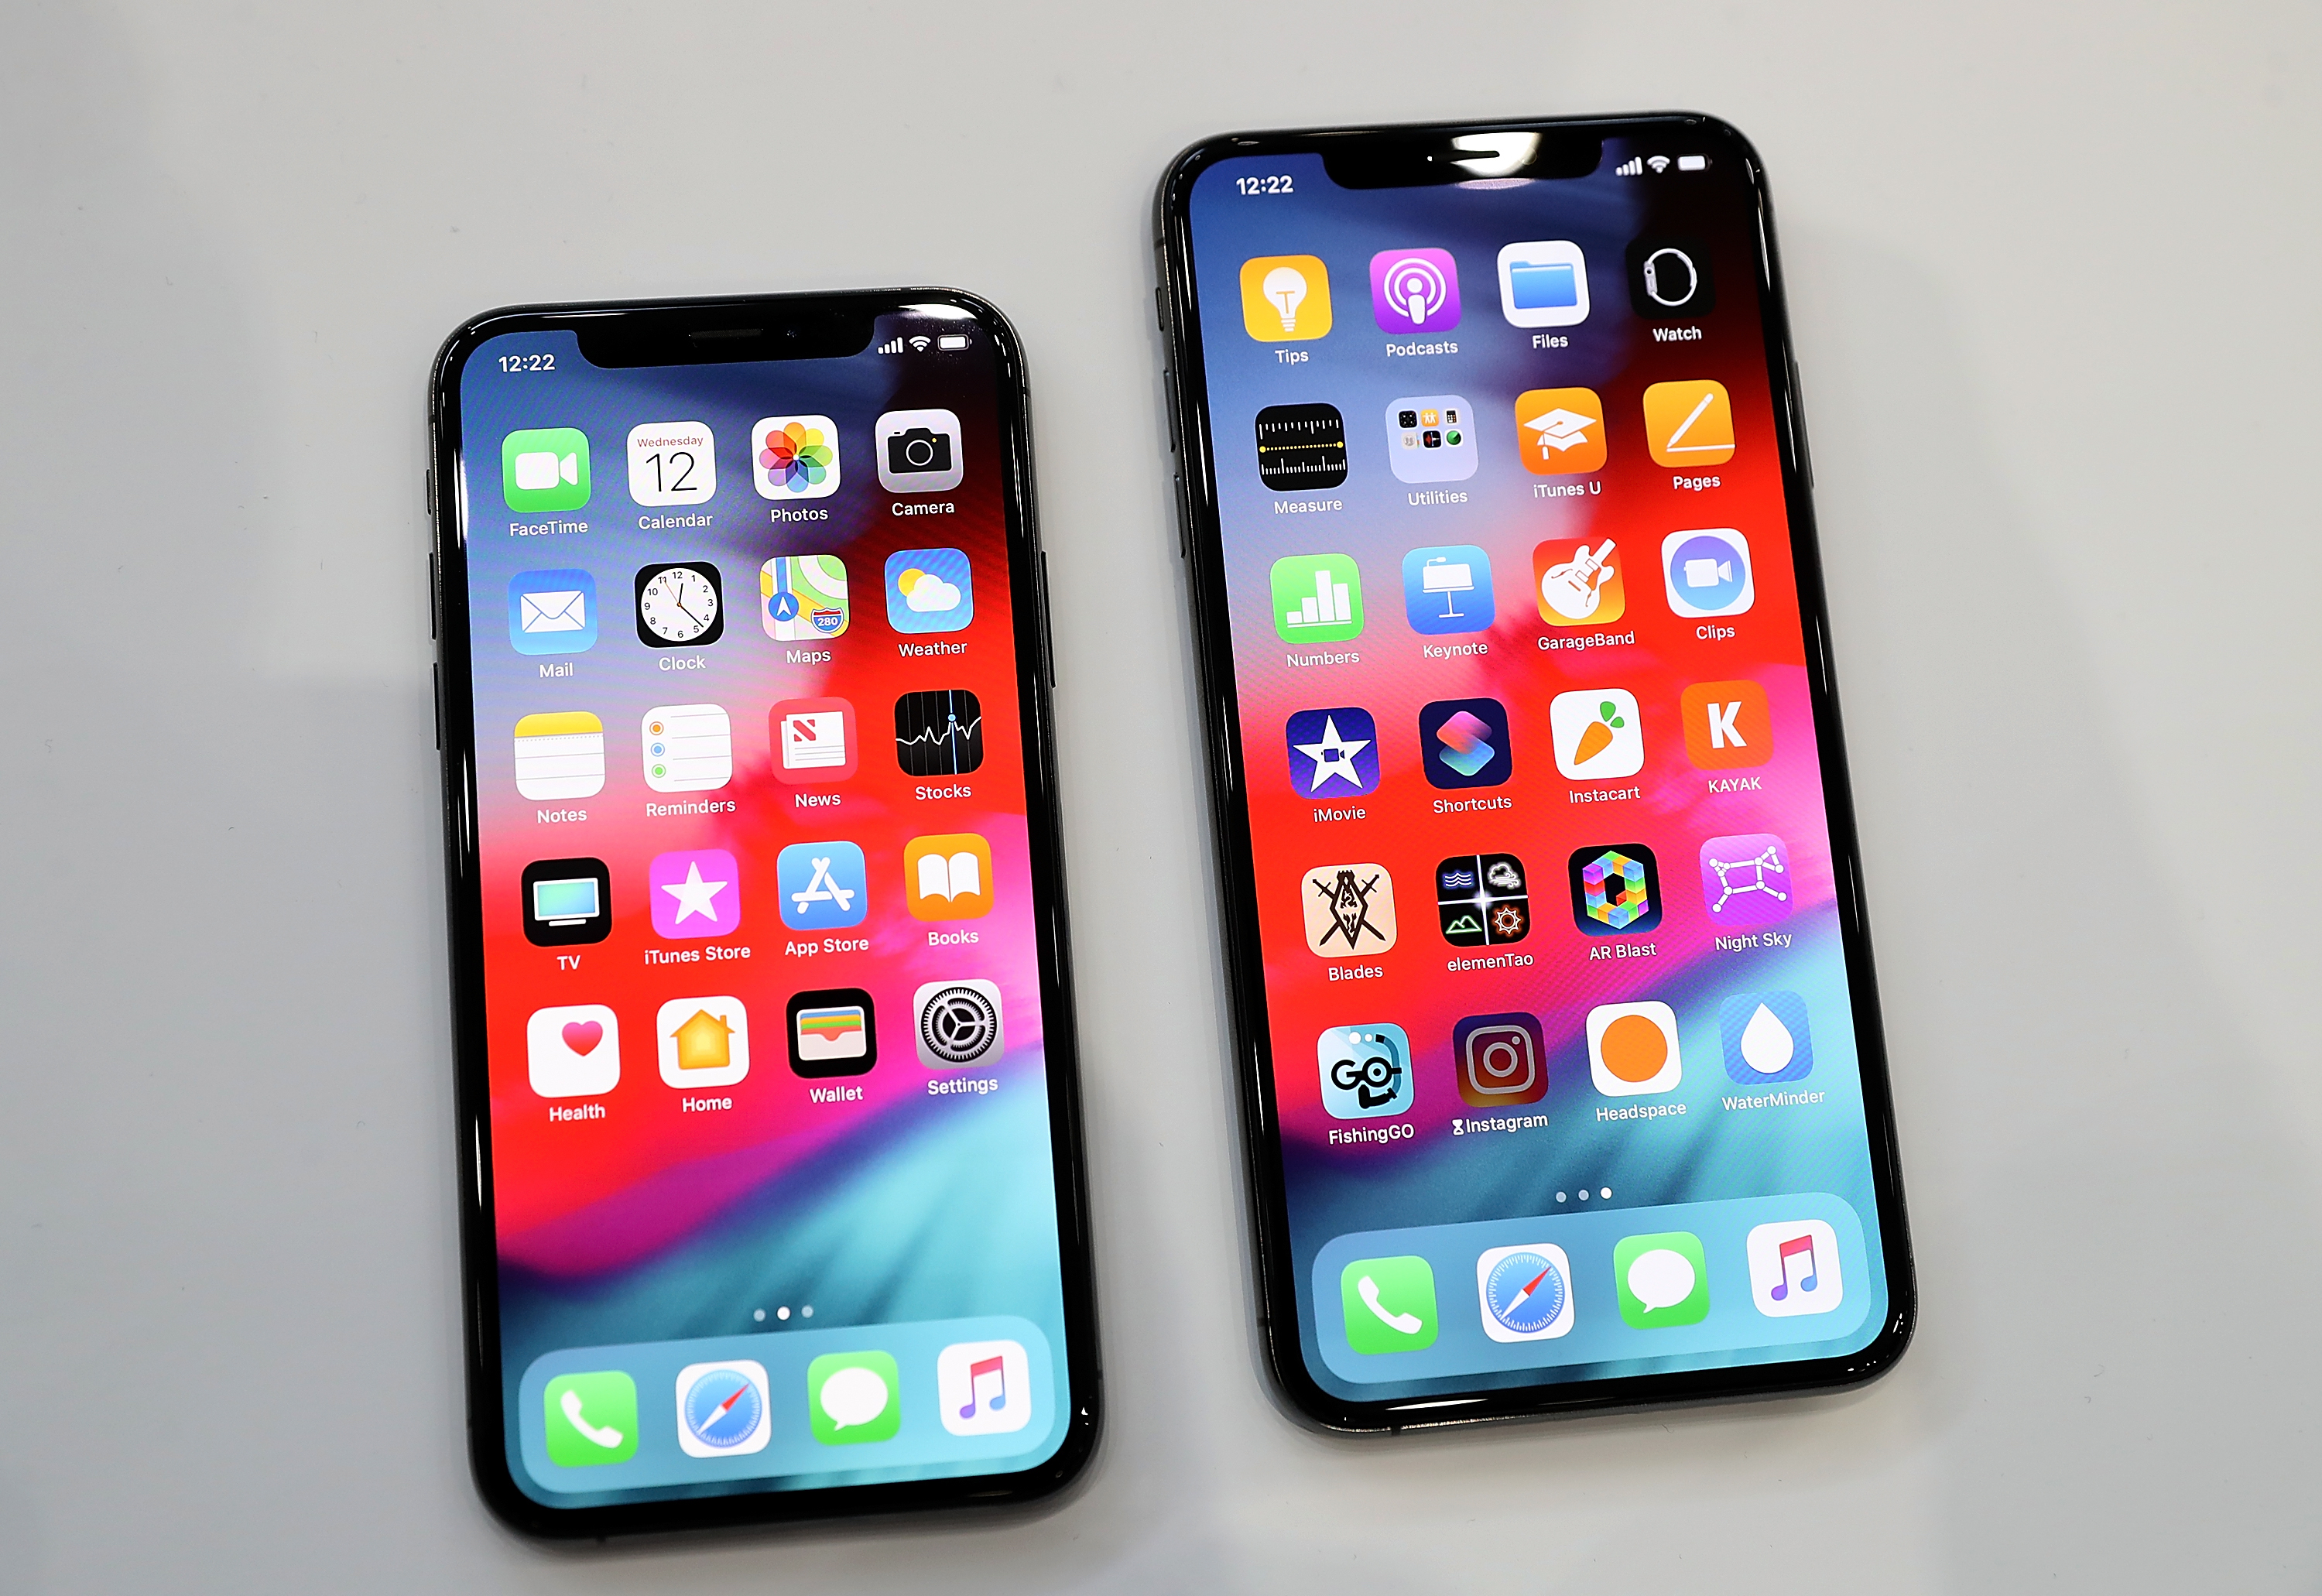 The new Apple iPhone Xs (L) and iPhone Xs Max (R) are displayed during an Apple special event at the Steve Jobs Theatre on September 12, 2018 in Cupertino, California.  Apple released three new versions of the iPhone and an update Apple Watch.  (Photo by Justin Sullivan/Getty Images)